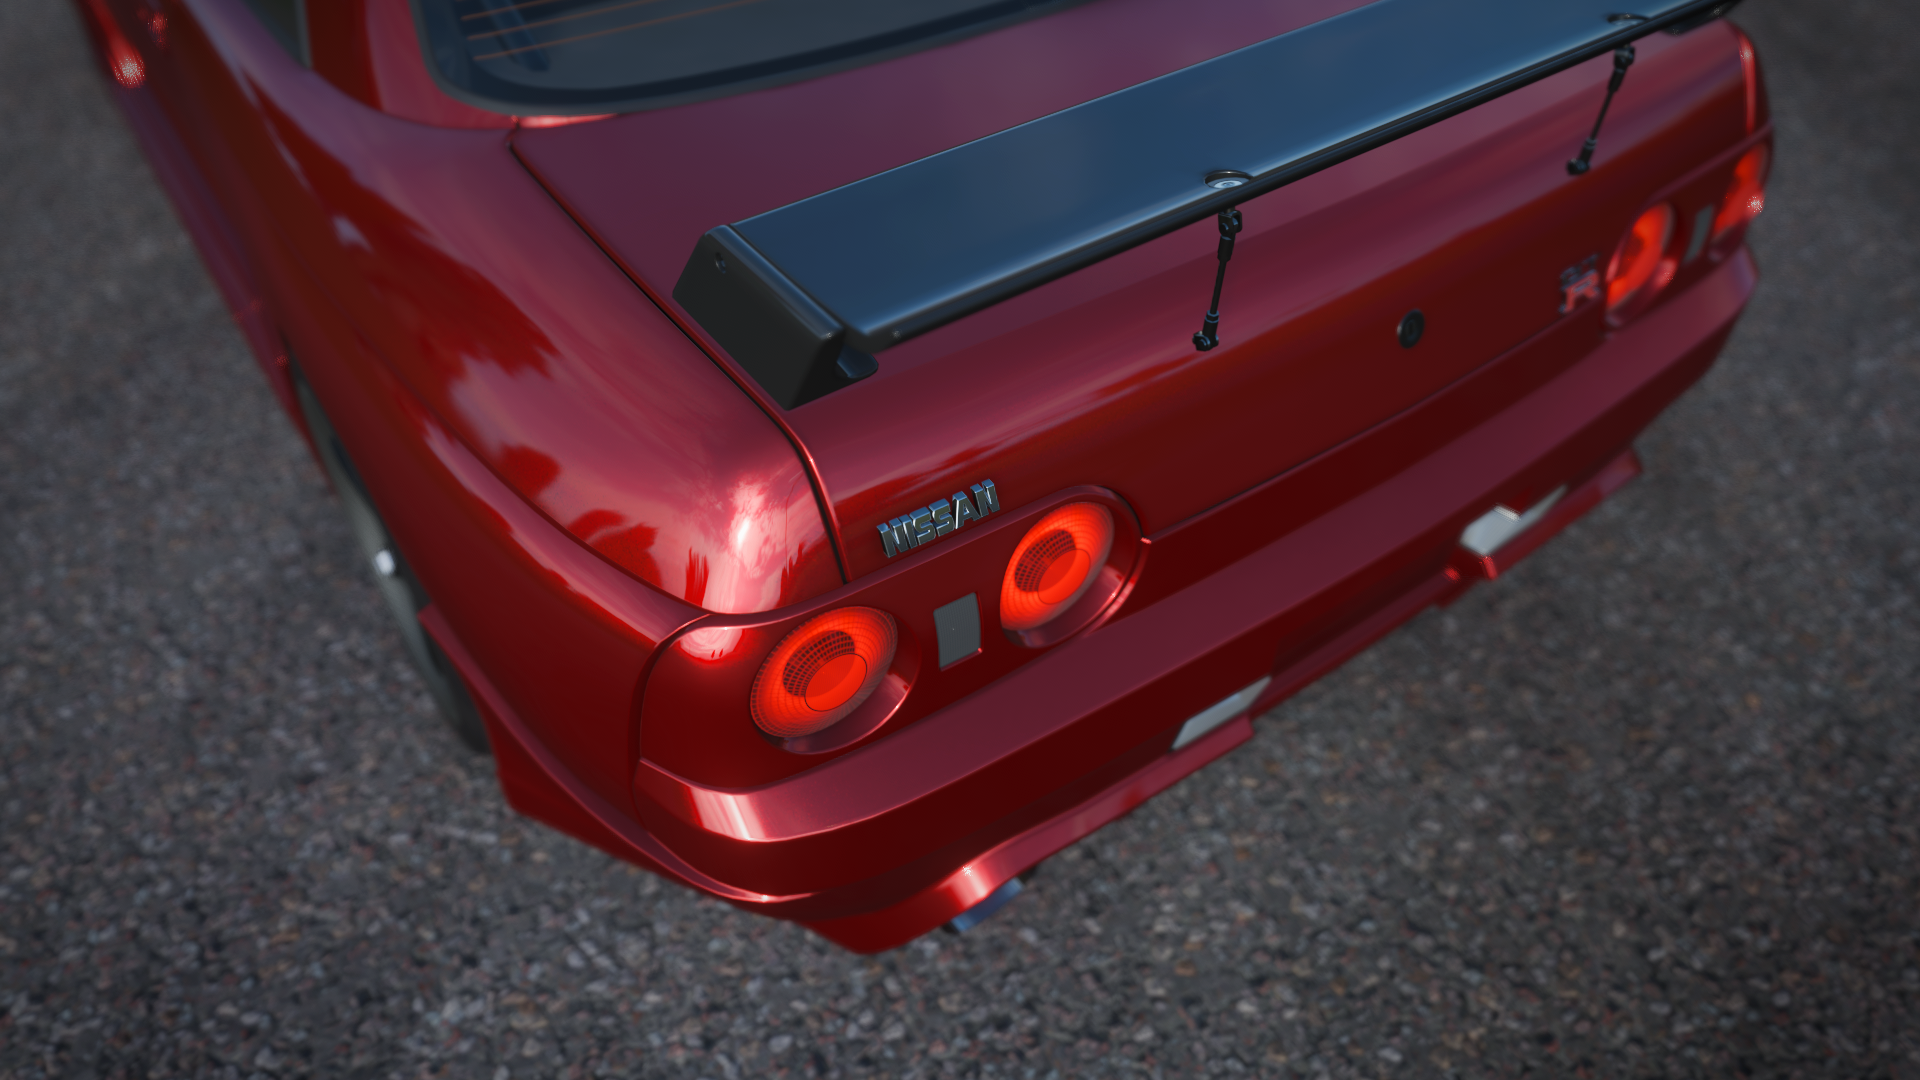 General 1920x1080 Nissan Nissan Skyline R32 car Forza Horizon 4 Japanese cars video games PlaygroundGames vehicle video game art CGI Nissan Skyline rear view taillights